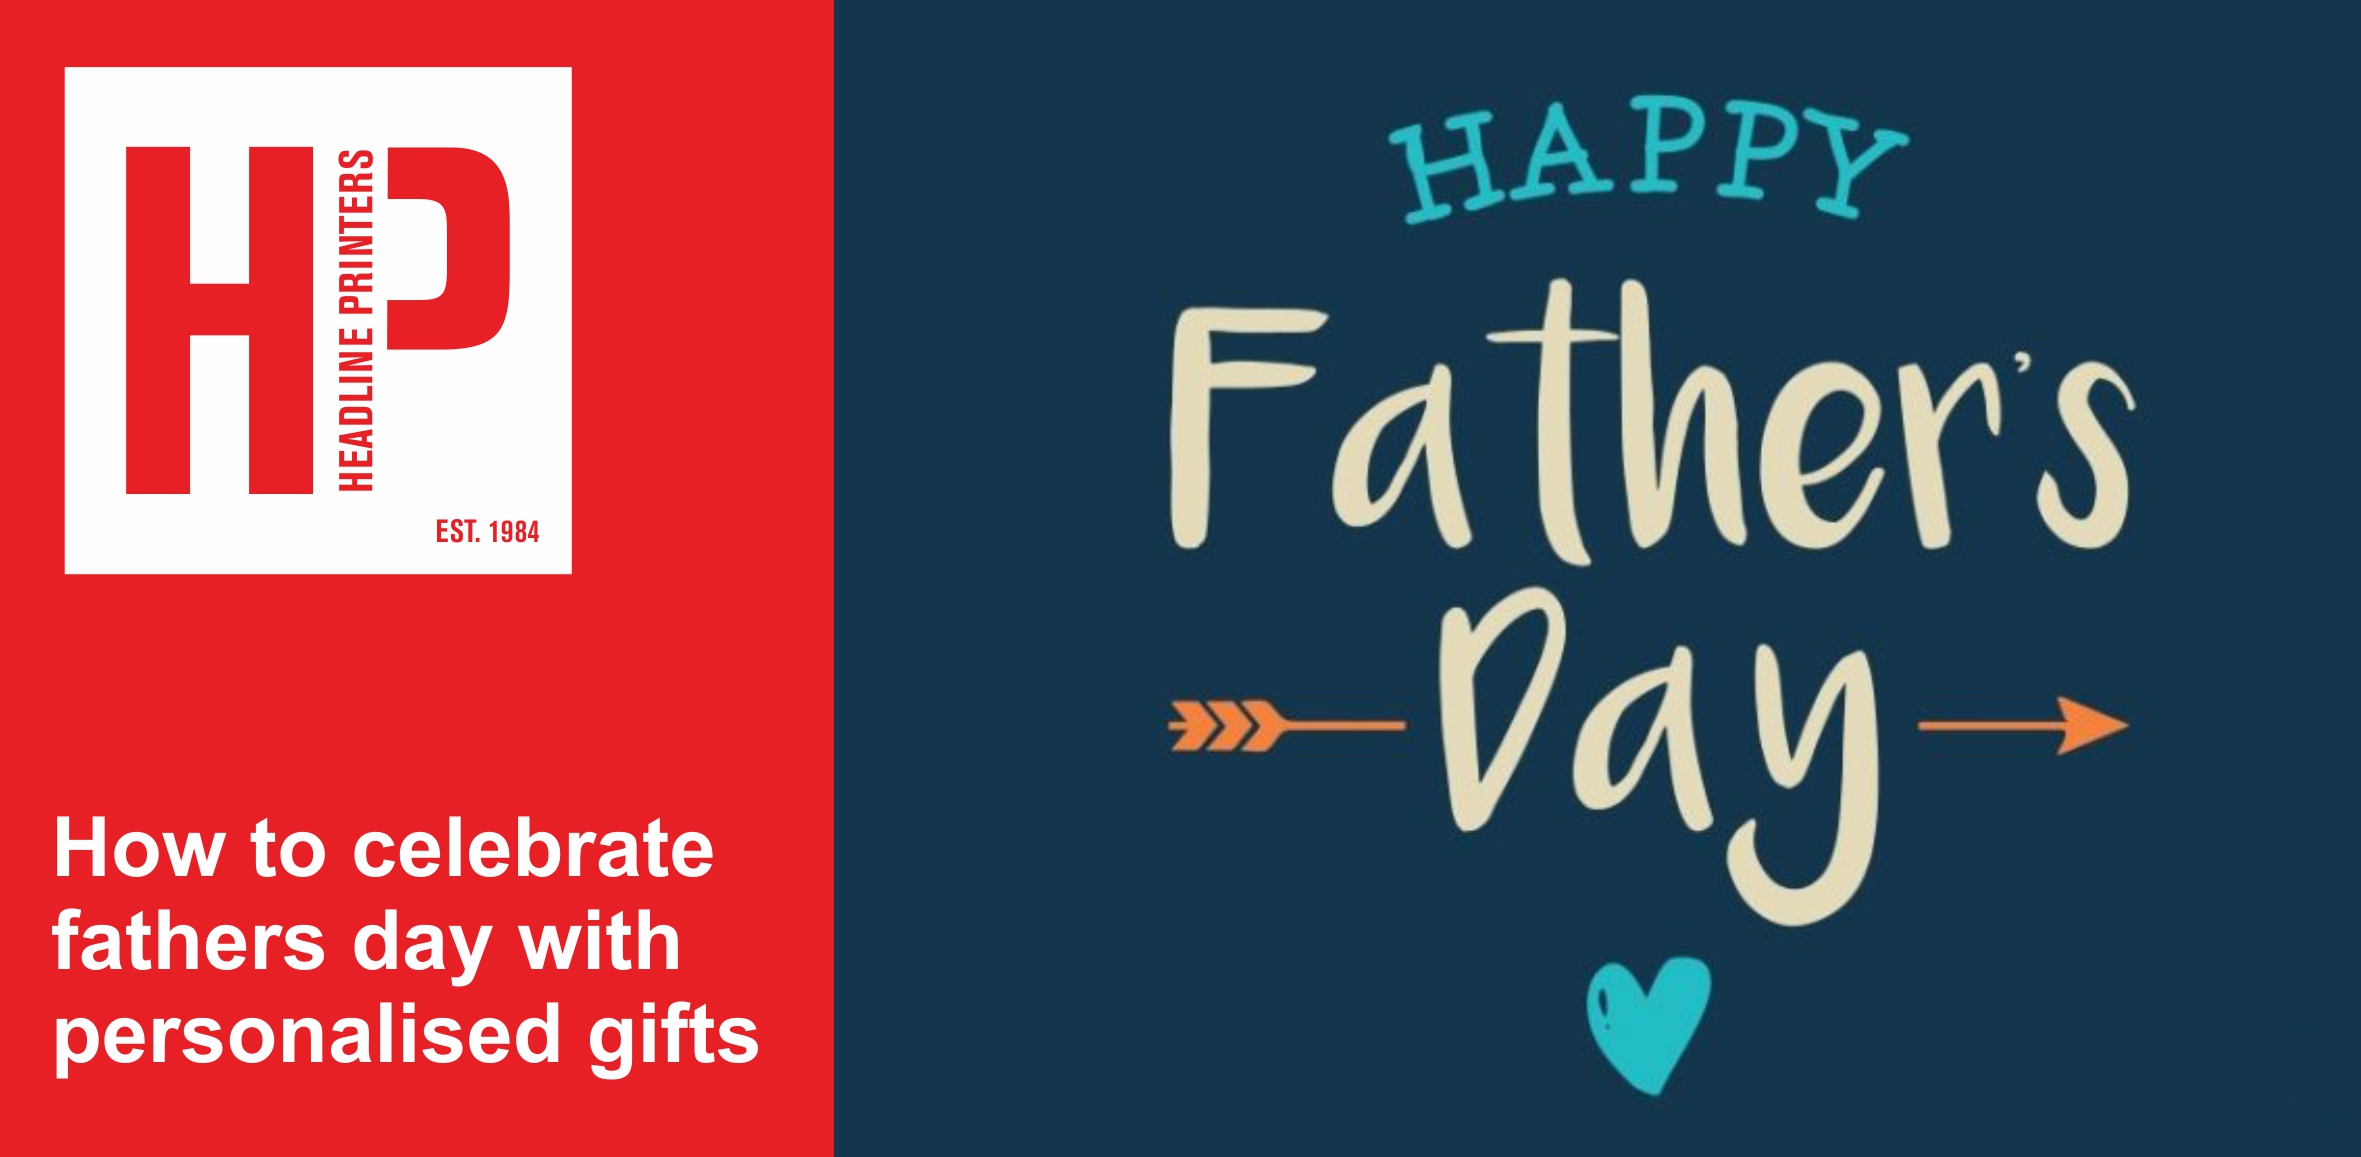 How to celebrate father's day with personalised gifts